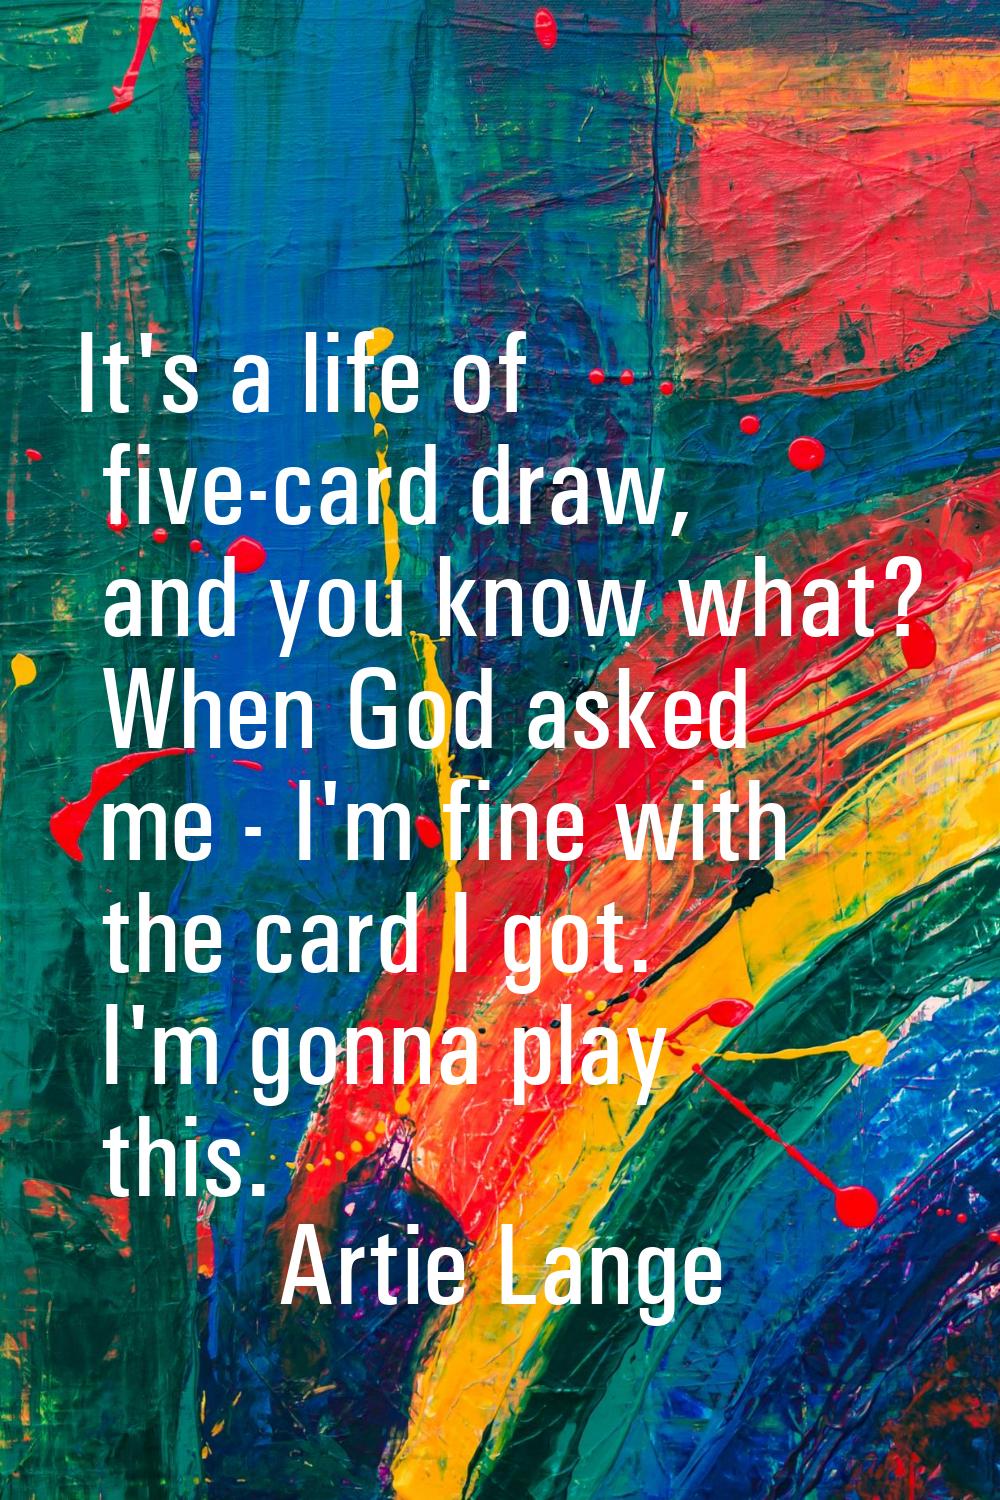 It's a life of five-card draw, and you know what? When God asked me - I'm fine with the card I got.